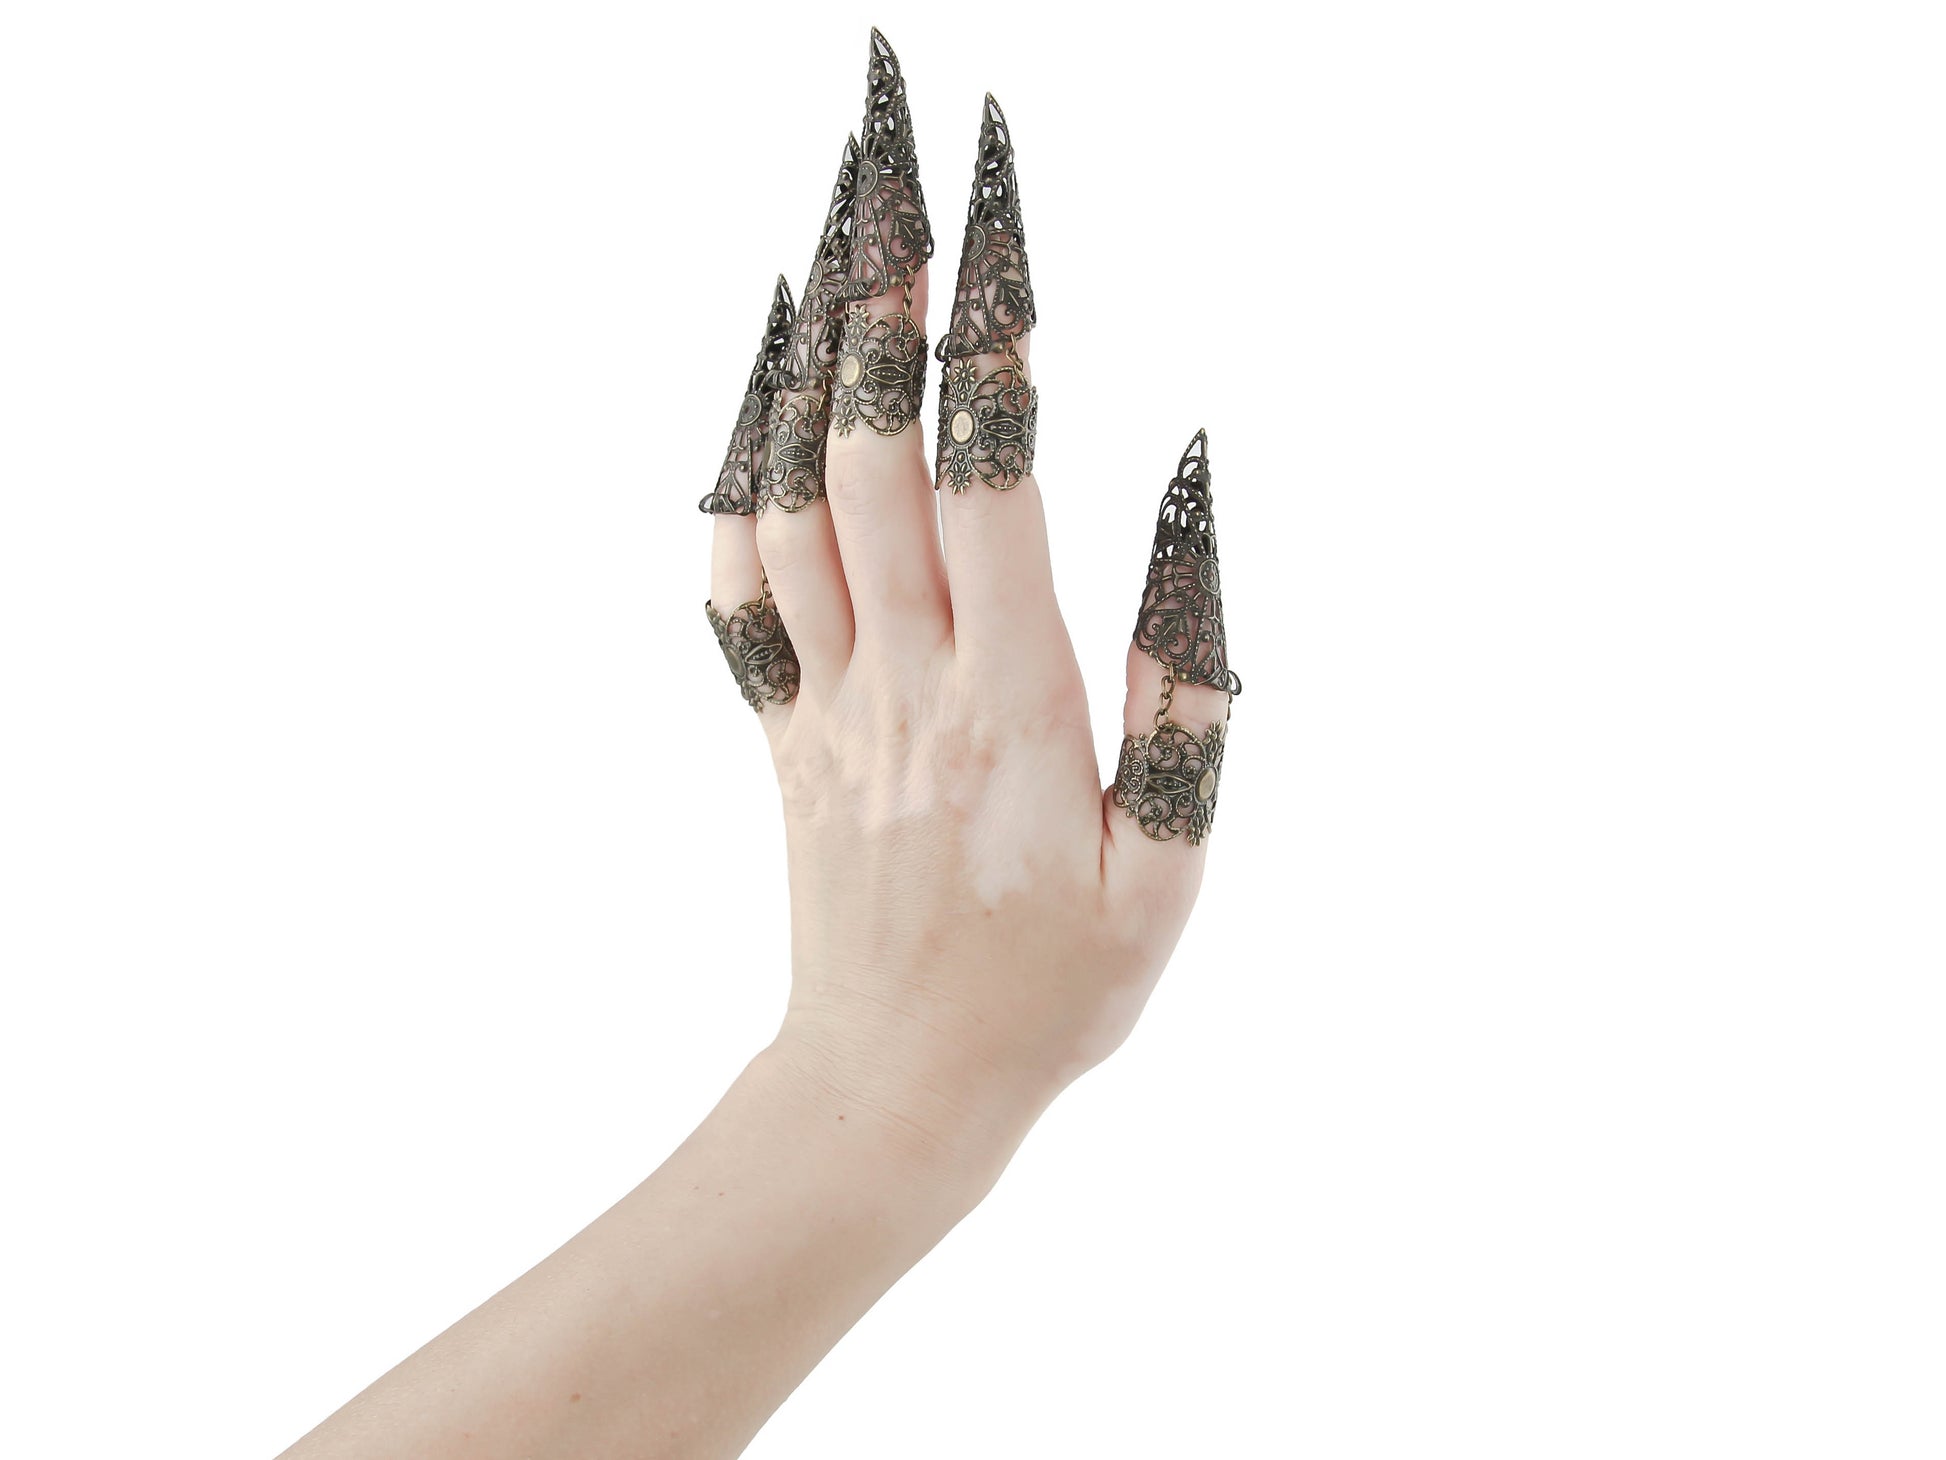 Showcase the striking allure of Myril Jewels with this full hand set of bronze midi rings, each ring extending into an elegant claw design. The intricate detail reflects a neo-gothic aesthetic, perfect for the gothic and alternative style connoisseur. These rings are an impeccable choice for Halloween, embodying the essence of punk jewelry and witchcore. They serve as an avant-garde statement piece, ideal for minimal goth everyday wear or as a dramatic accessory for rave parties and festivals